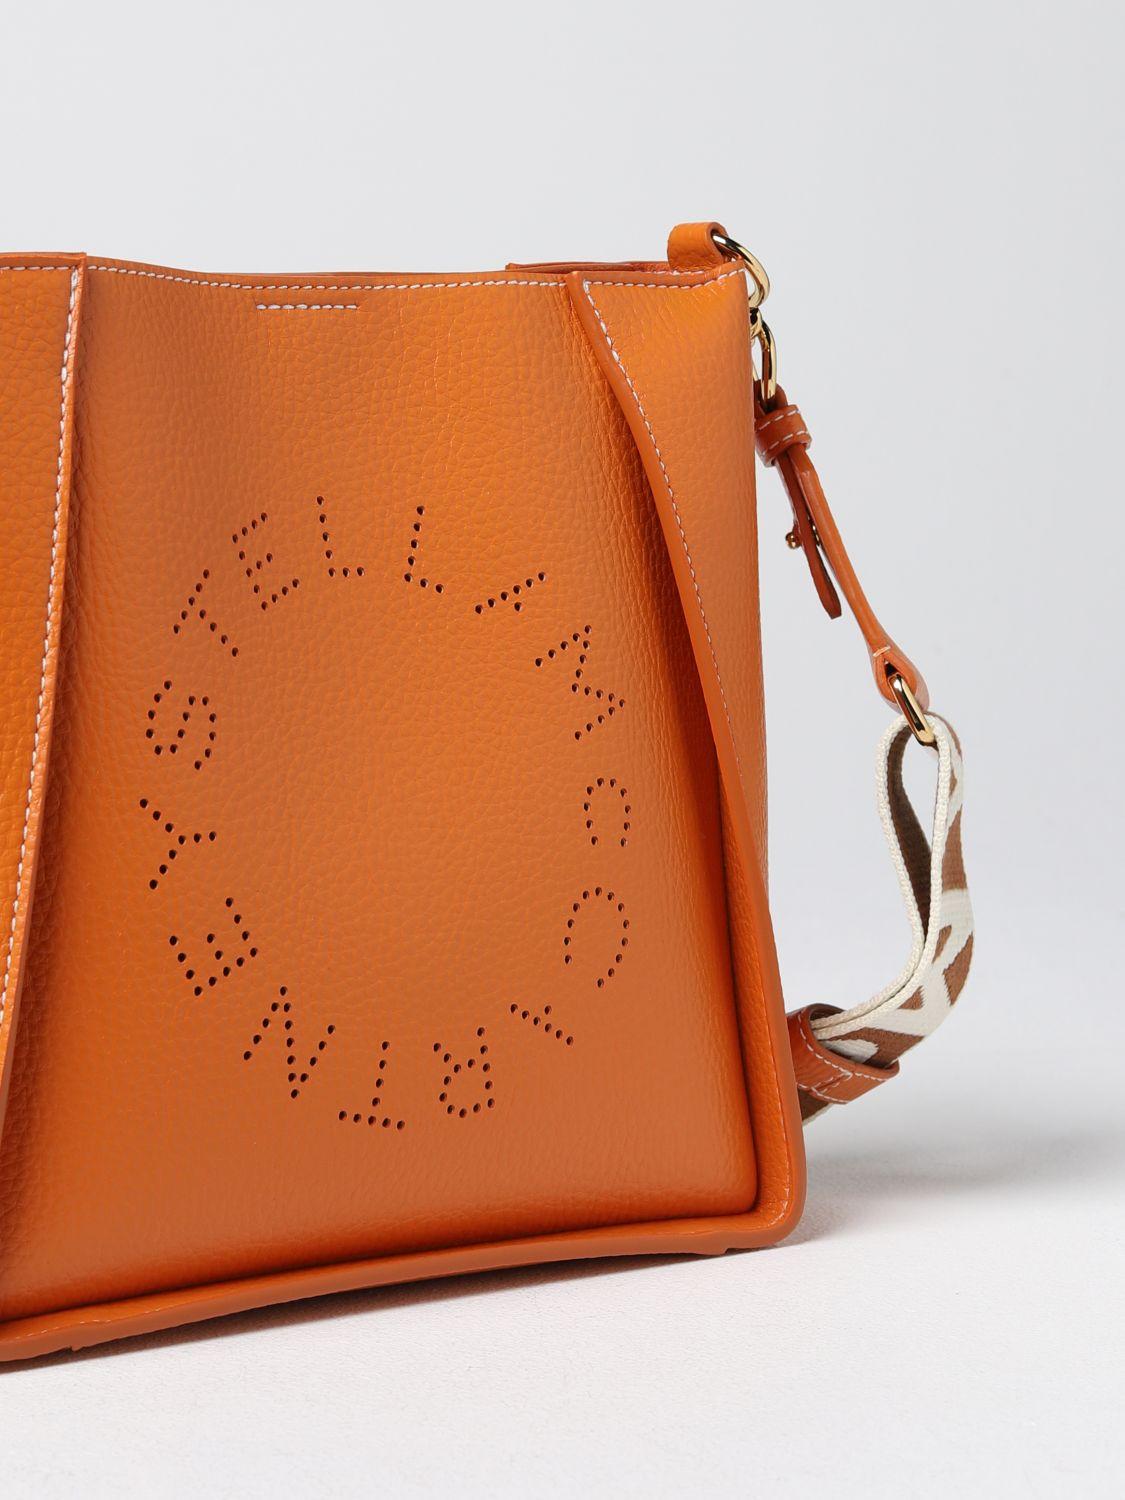 Stella McCartney to debut first-ever mushroom leather bag | Vogue Business